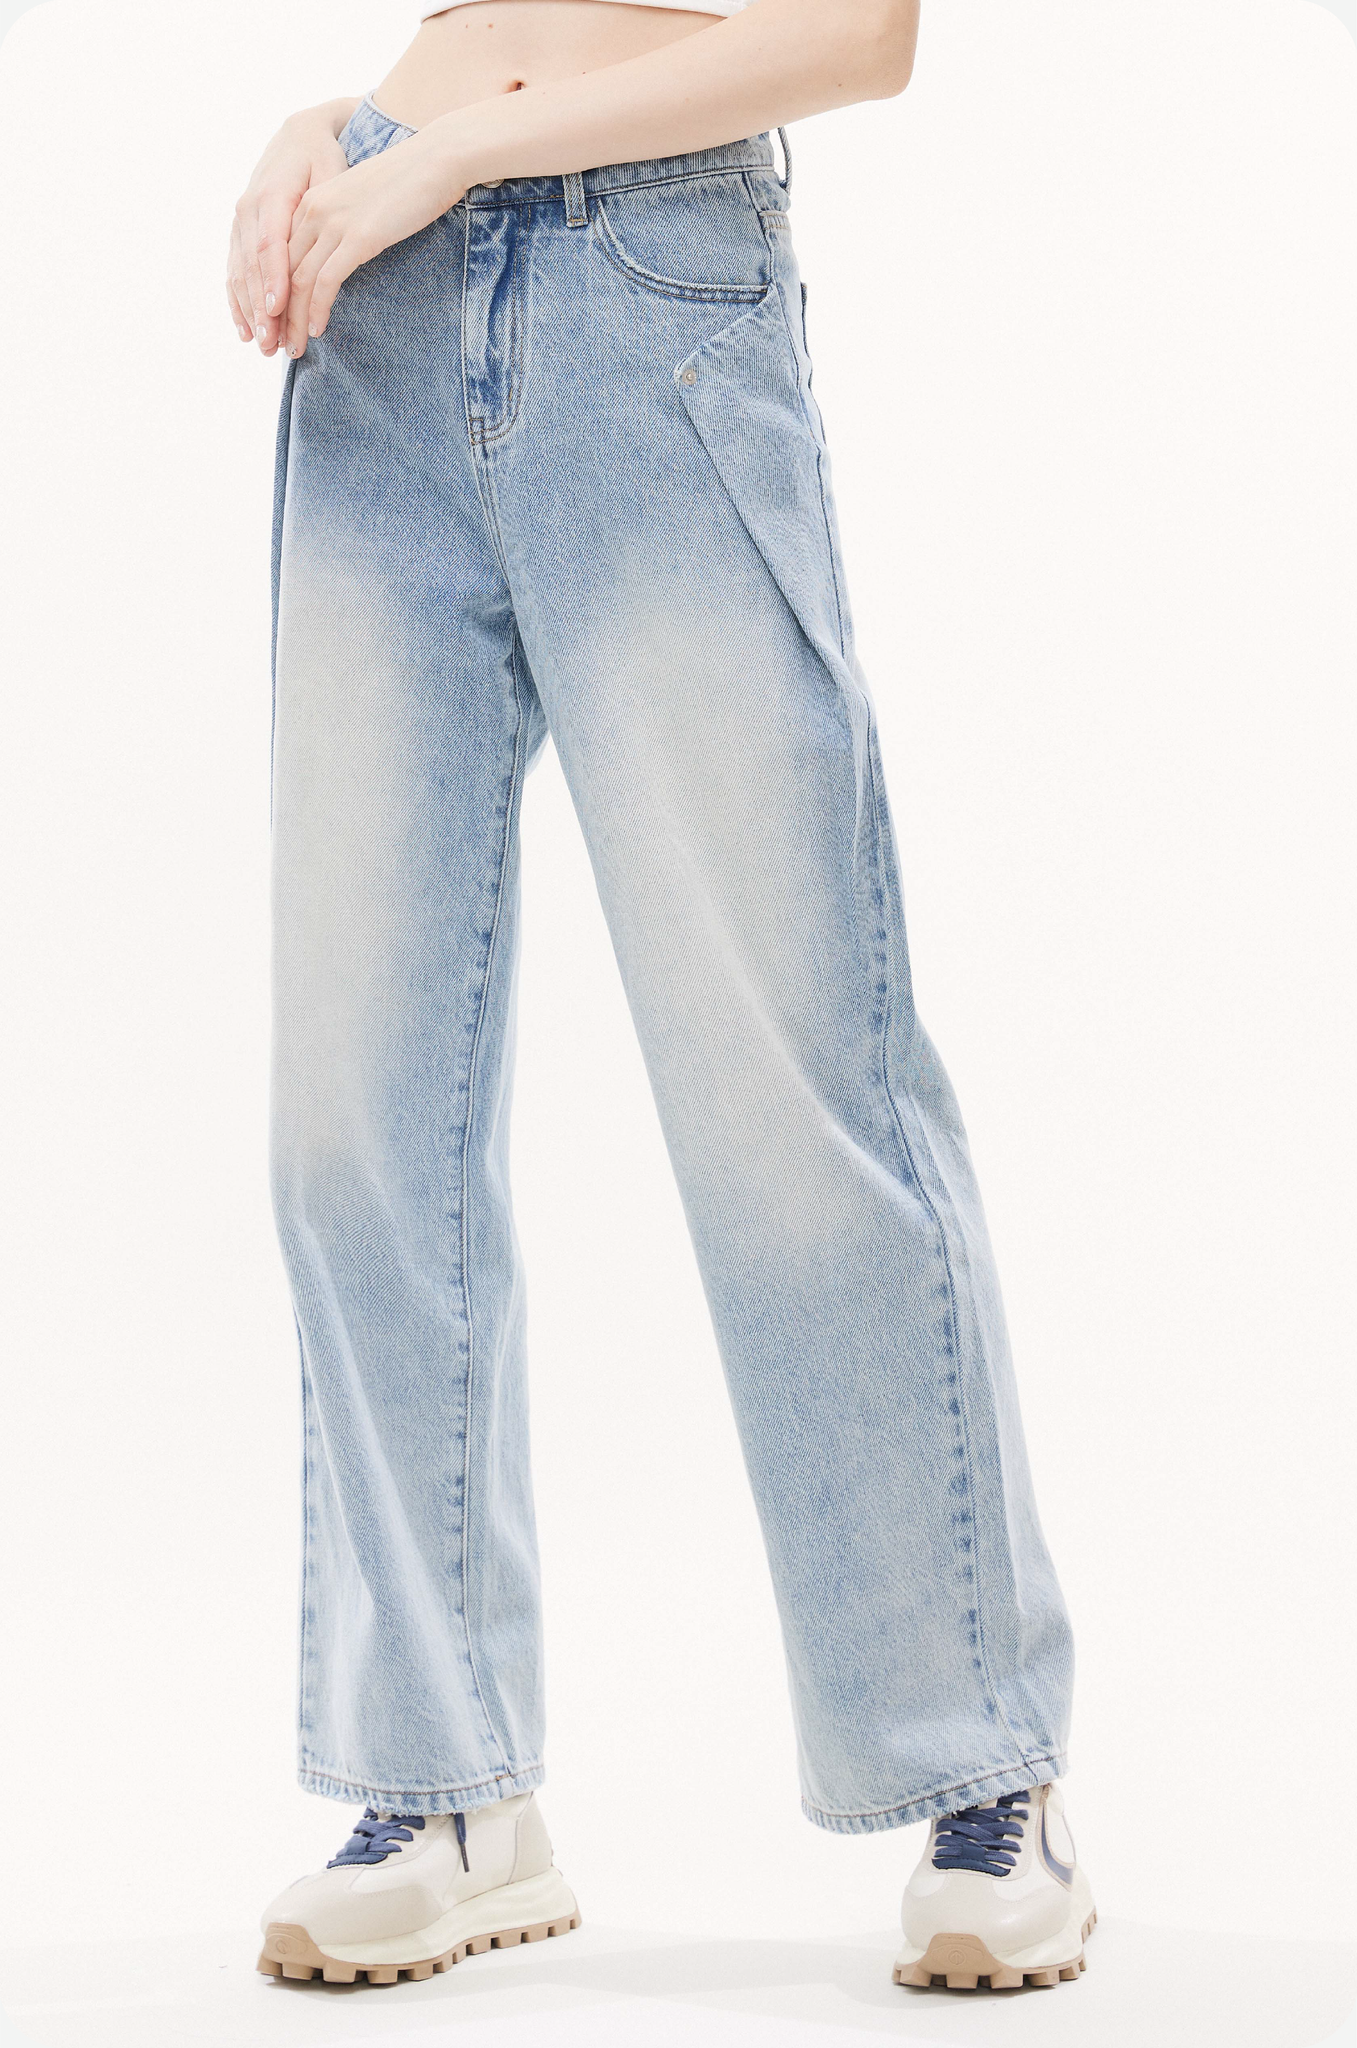 Straight Cut Jeans With Side Seam Design